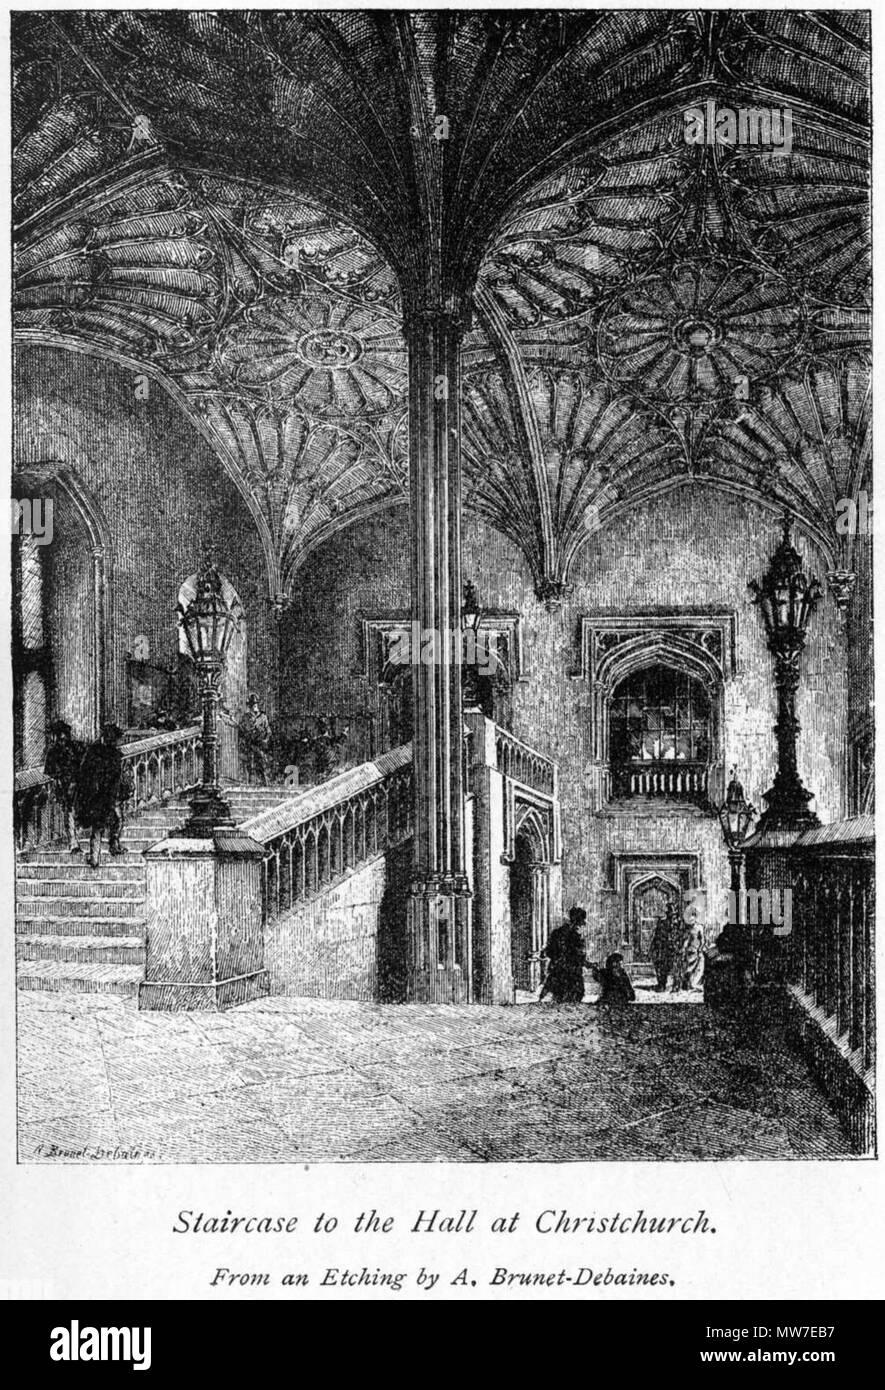 . English: Staircase to the hall at Christchurch - Oxford: Brief Historical and Descriptive Notes by Andrew Lang, M.A., sometime Fellow of Merton College, Oxford [1844 – 1912]; sixth edition, Seely & Co. Ltd., London, 1896. 1896. Alfred-Louis Brunet-Debaines (1845-1939) 38 Alfred-Louis Brunet-Debaines06 Stock Photo